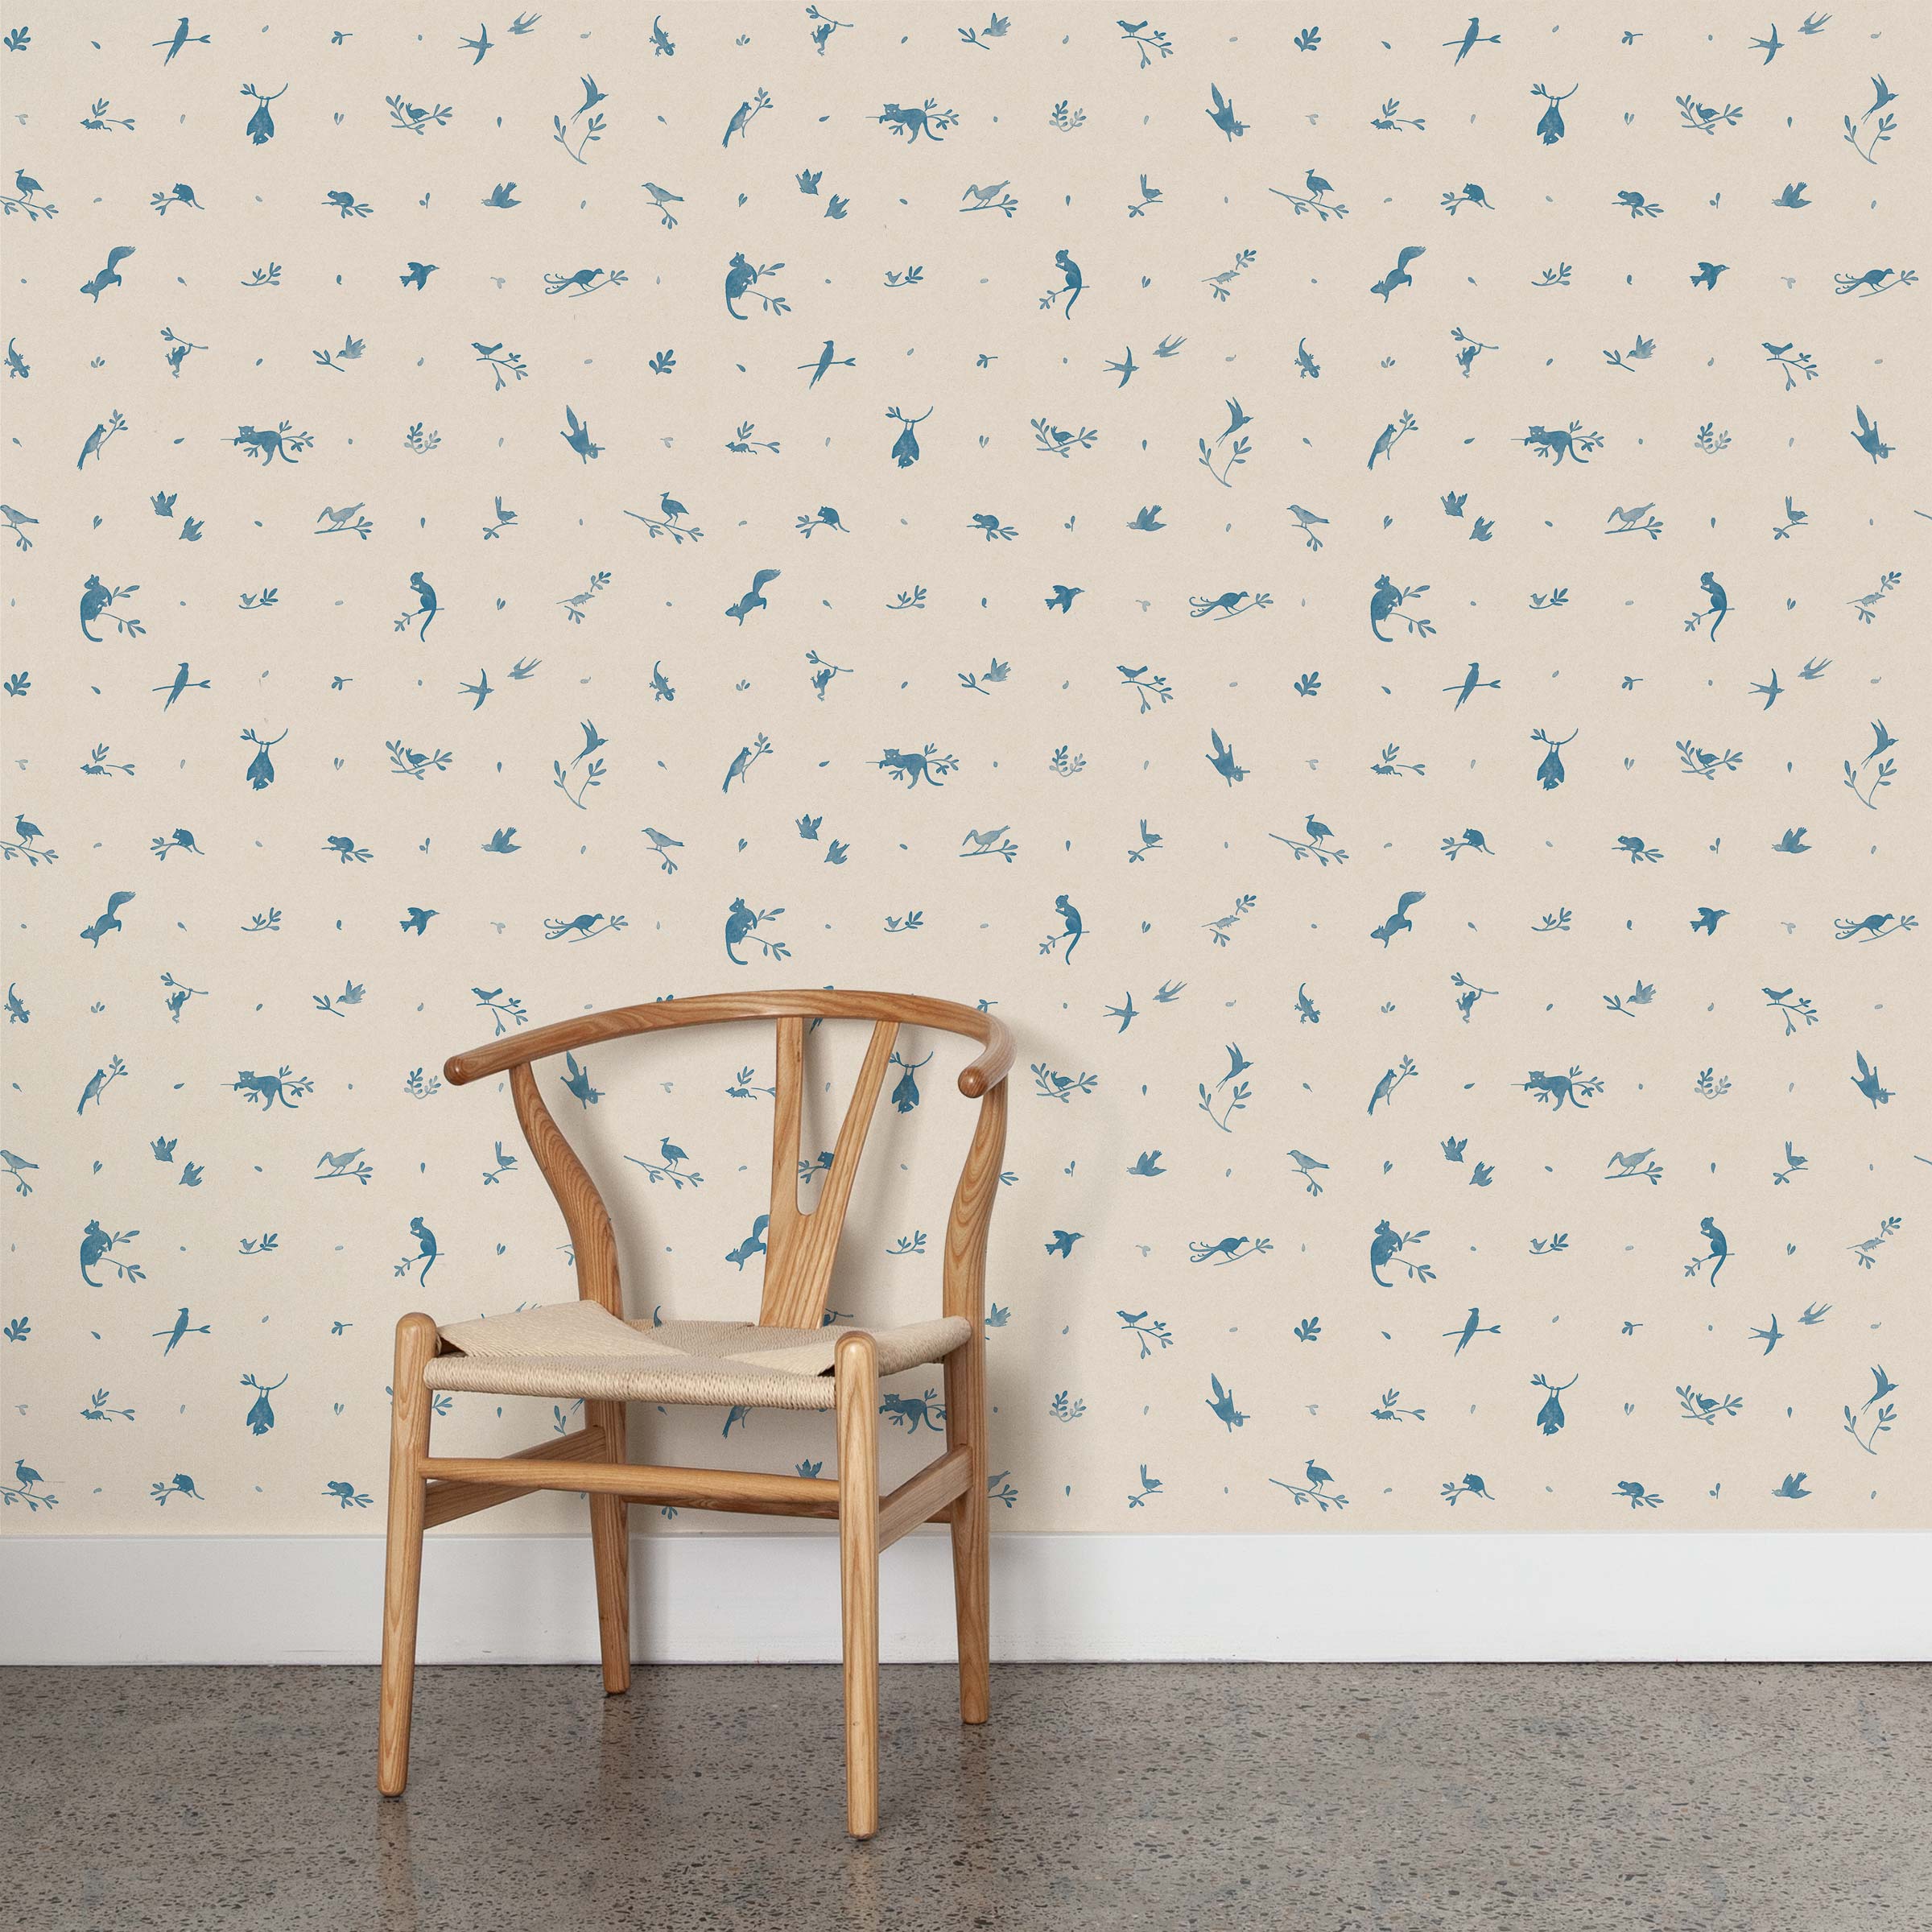 A wooden chair stands in front of a wall papered in a playful animal and branch print in blue on a cream field.